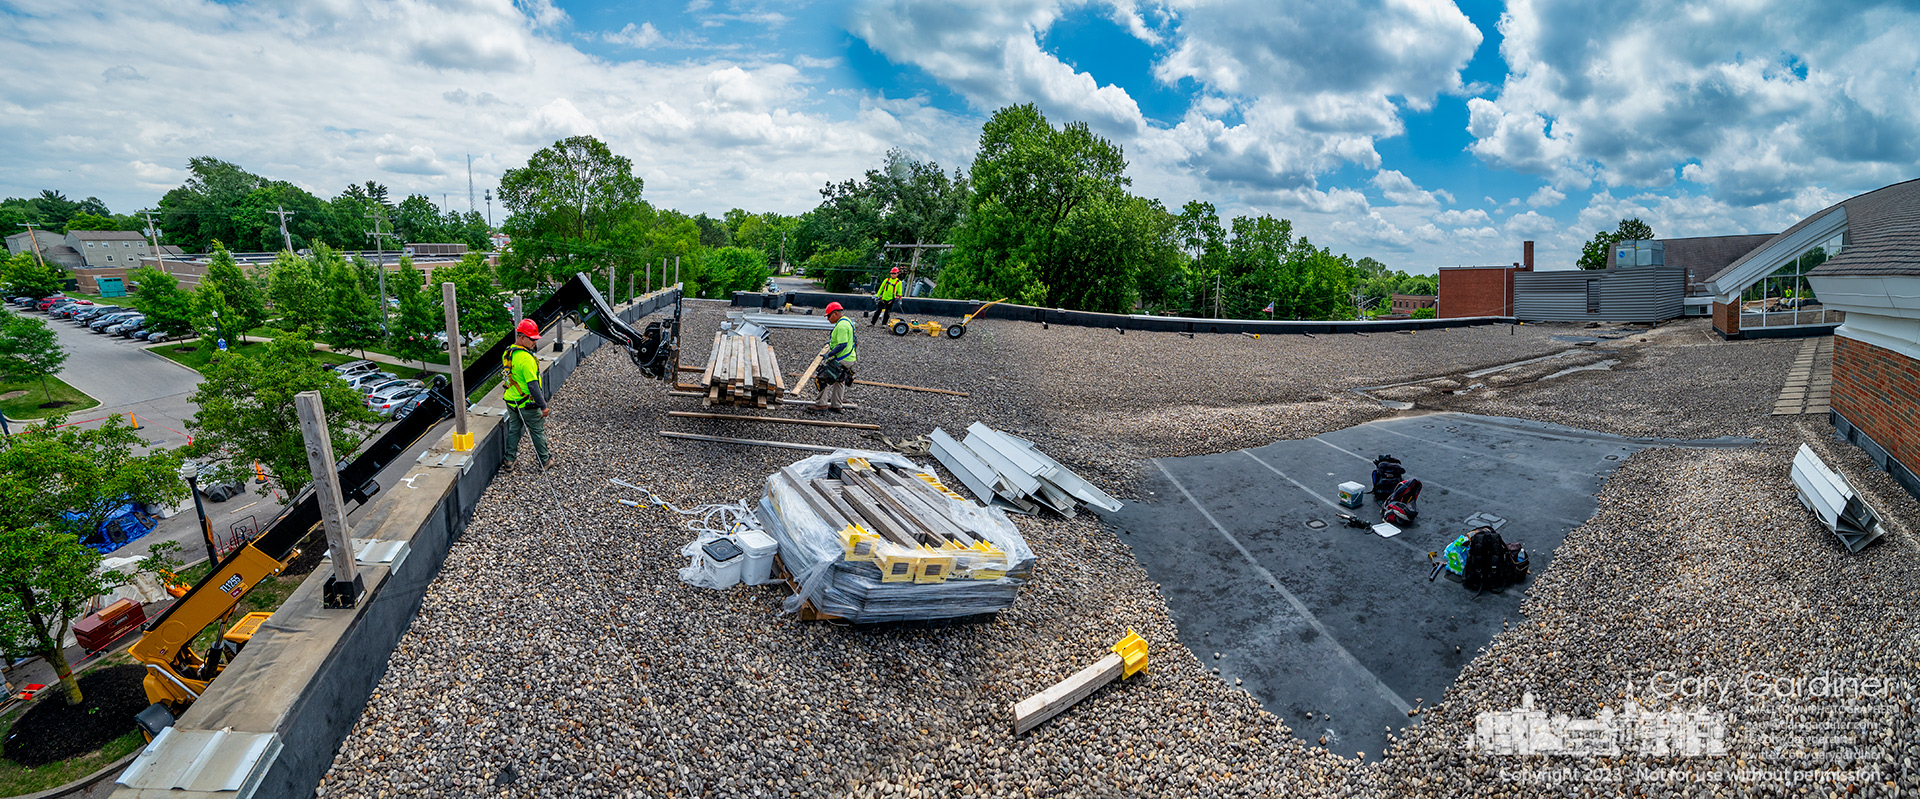 Roofers load building materials and tools onto the roof of the main Westerville Public Library building as they prepare to remove the old gravel-covered bladder roofing for a new metal roof. My Final Photo for June 26, 2023.